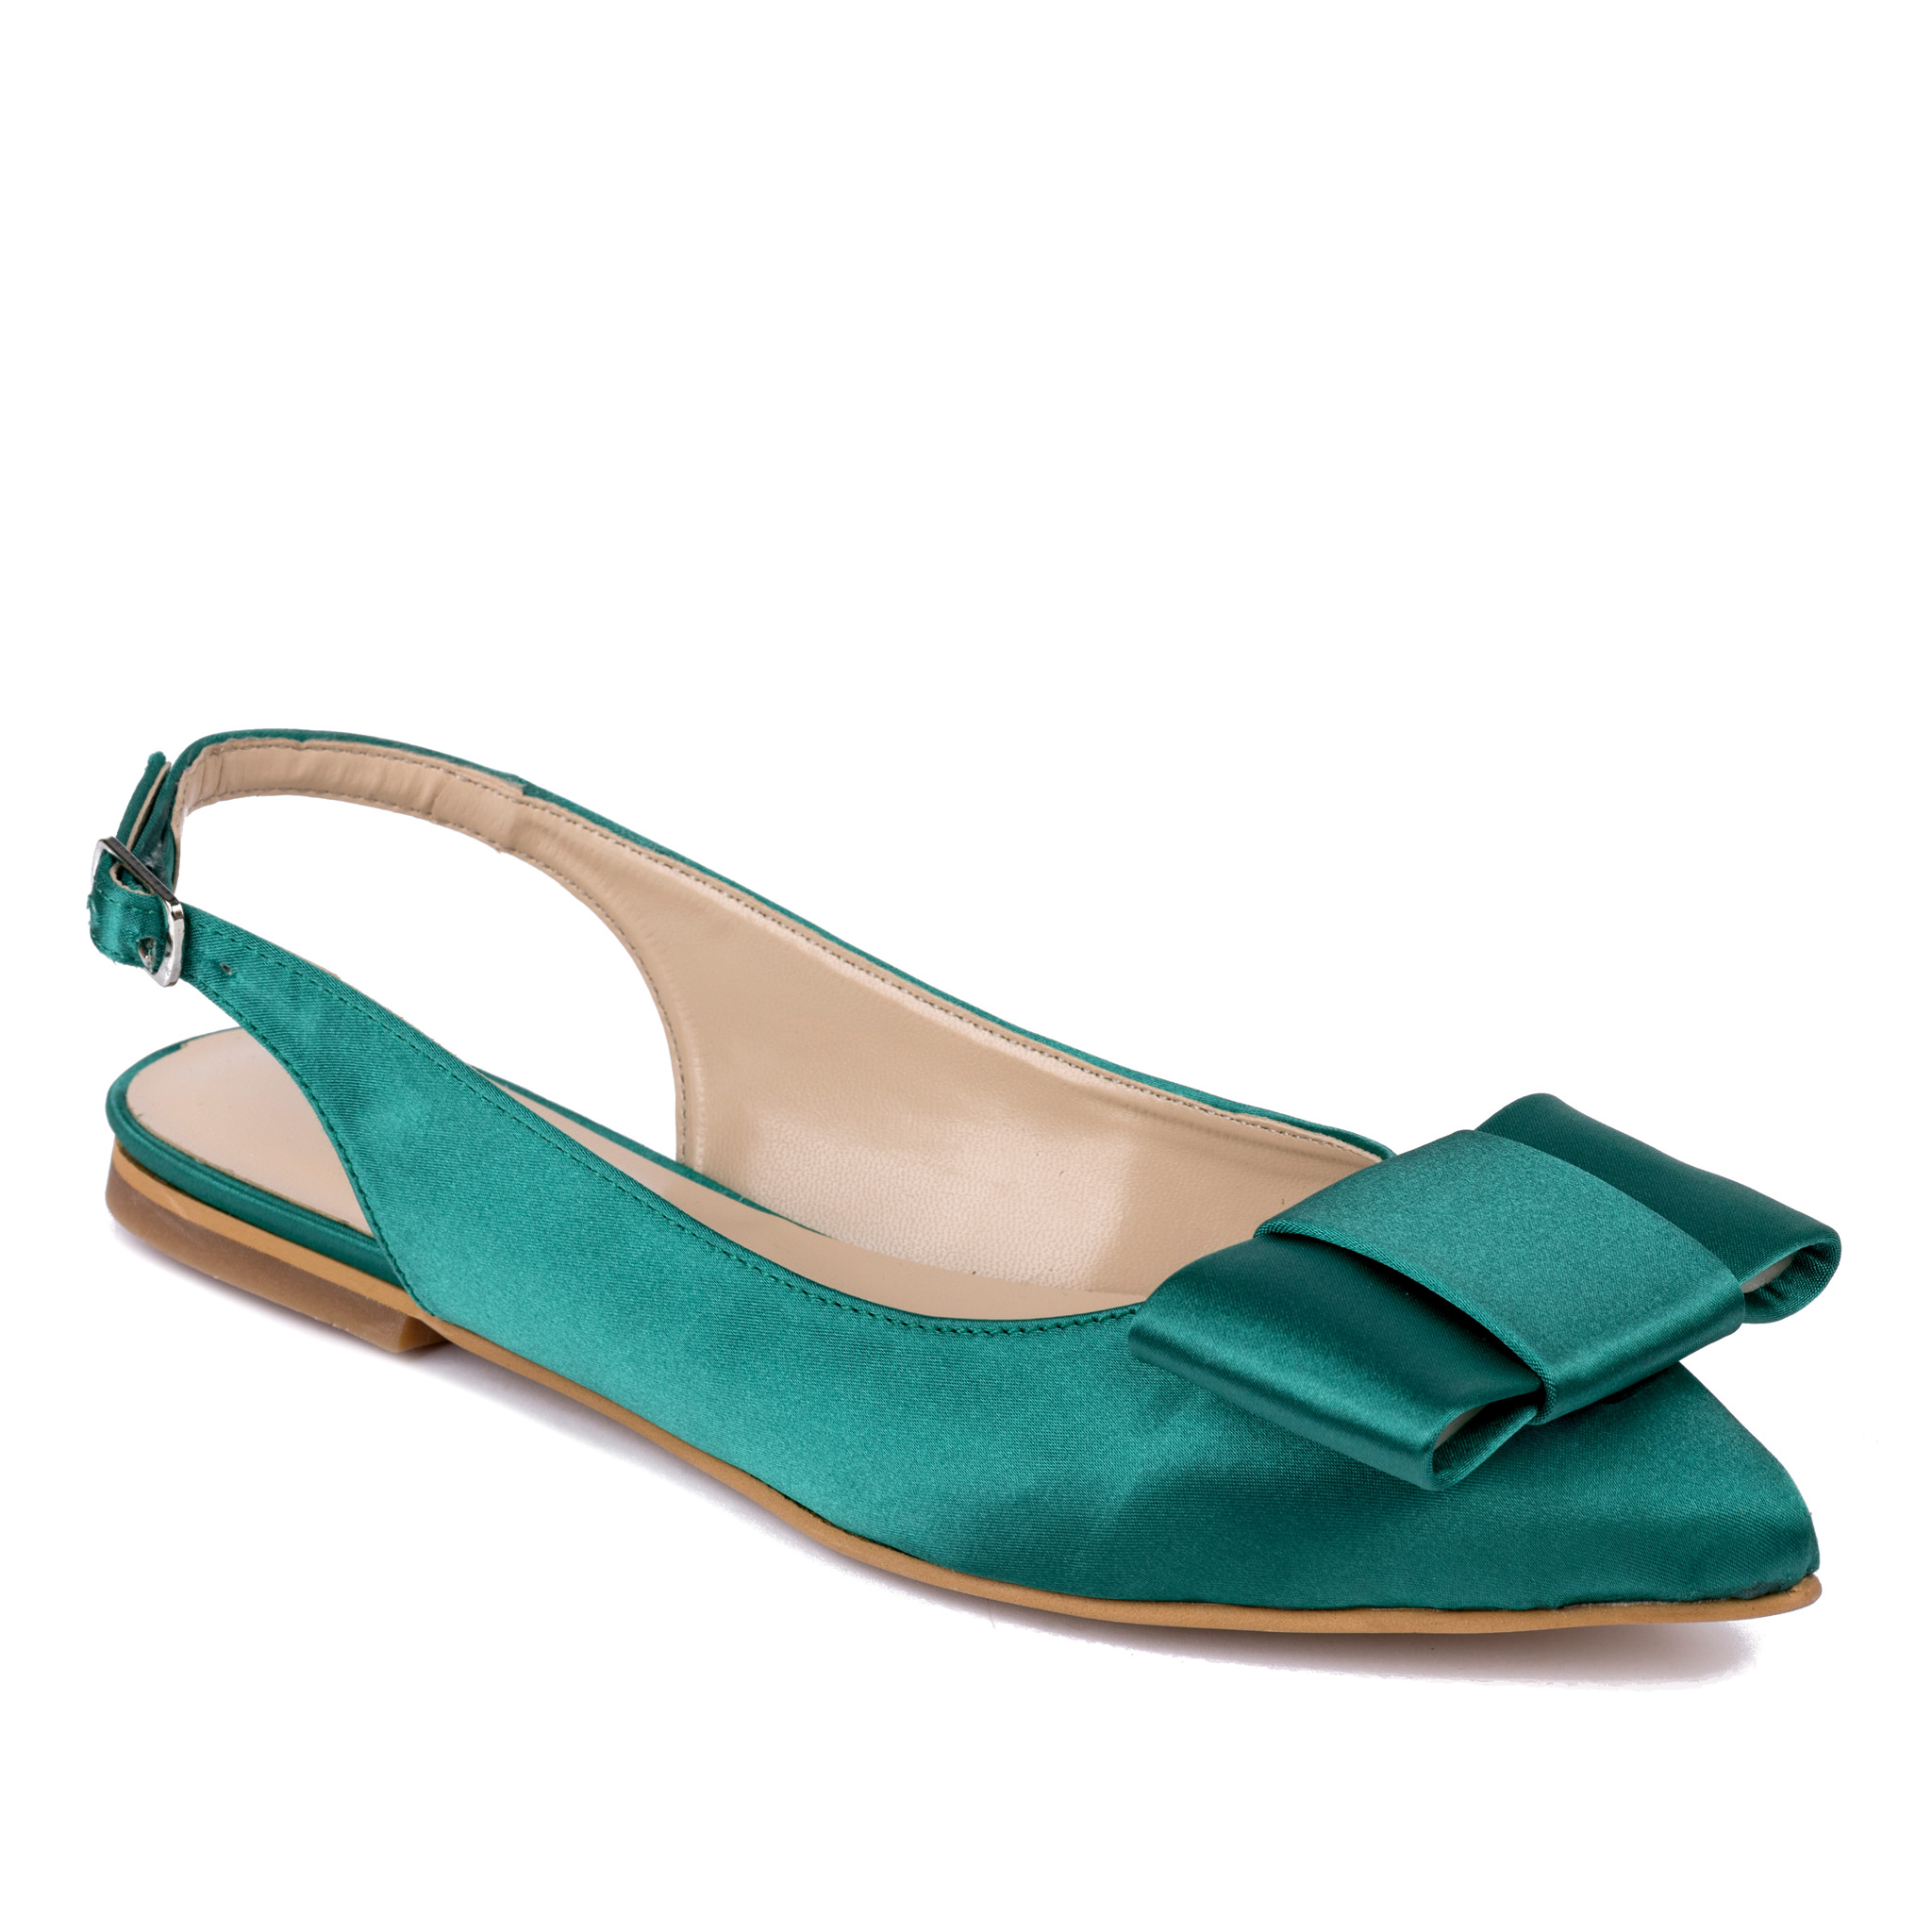 SATIN SANDALS WITH BOW - GREEN